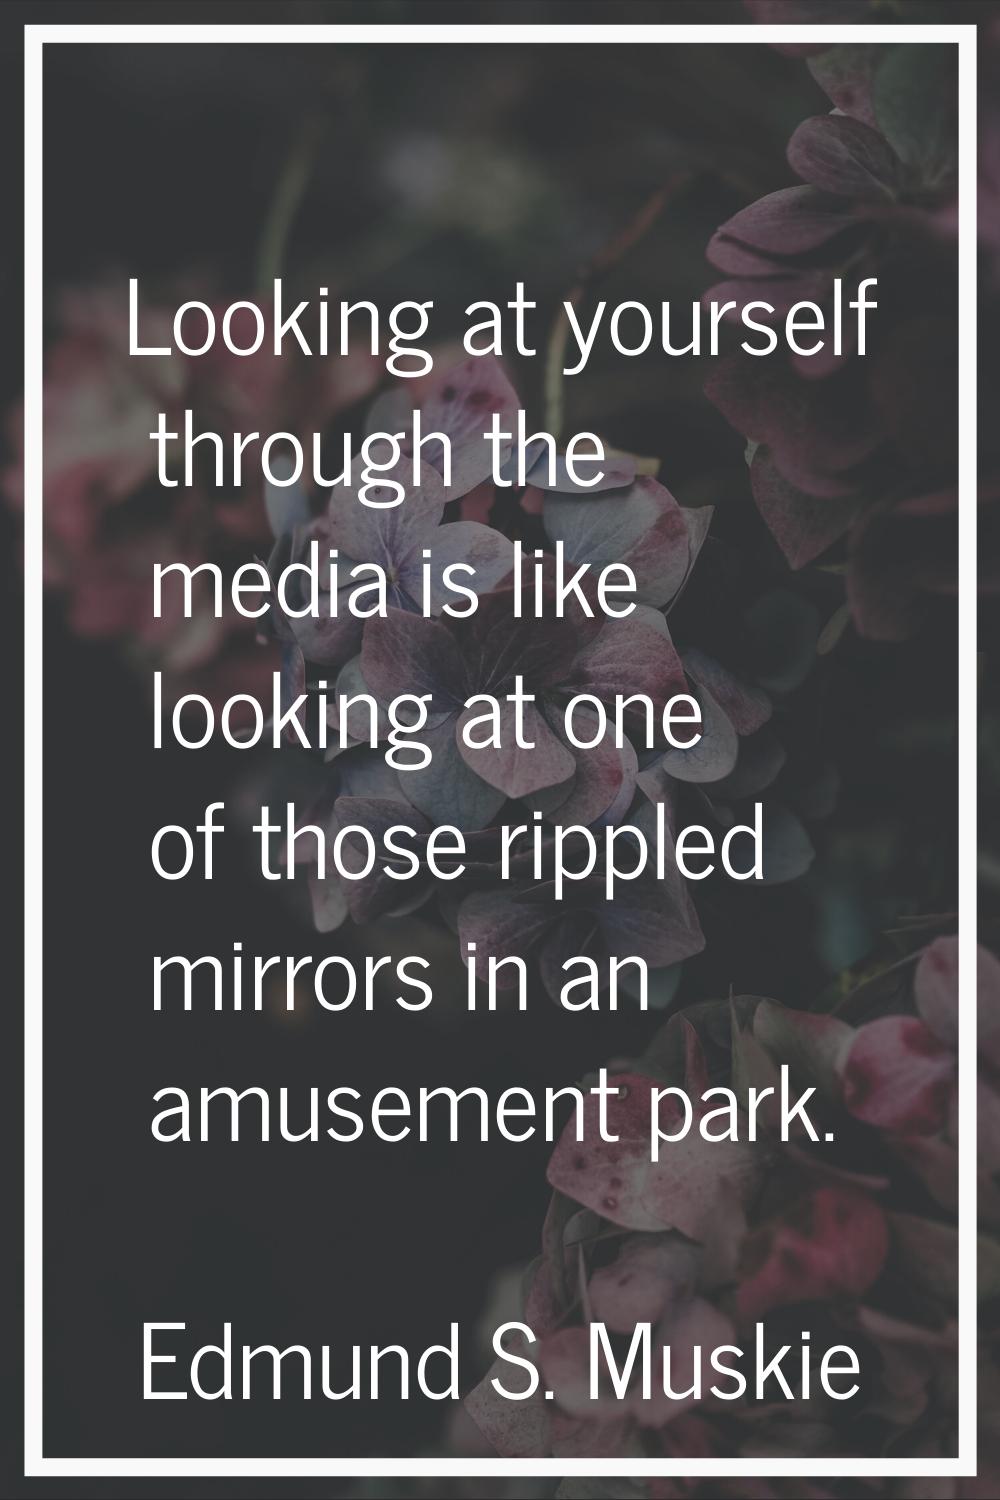 Looking at yourself through the media is like looking at one of those rippled mirrors in an amuseme